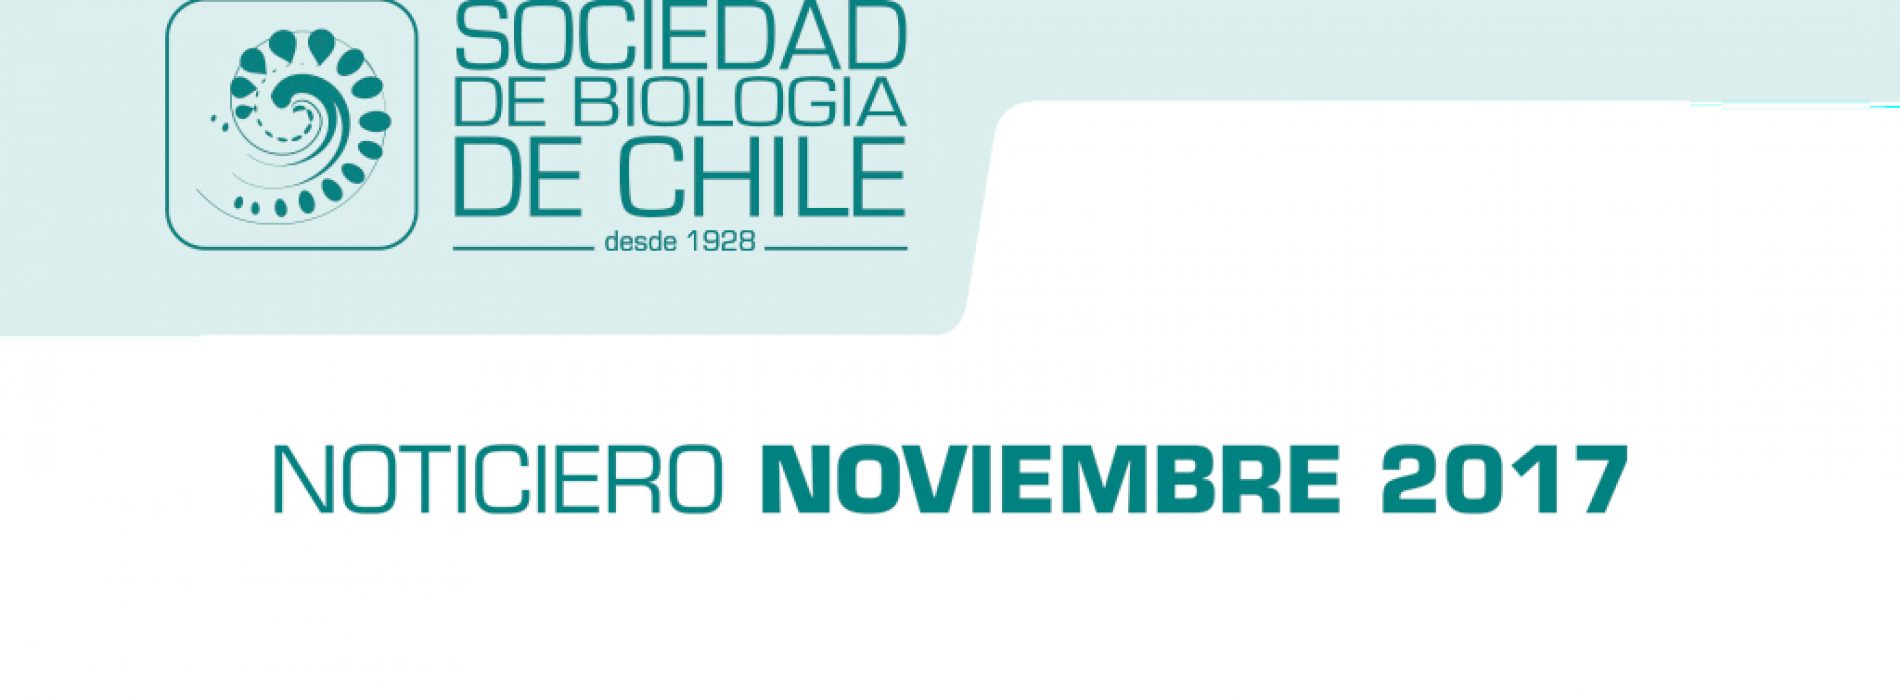 News month of November 2017, biology society of Chile